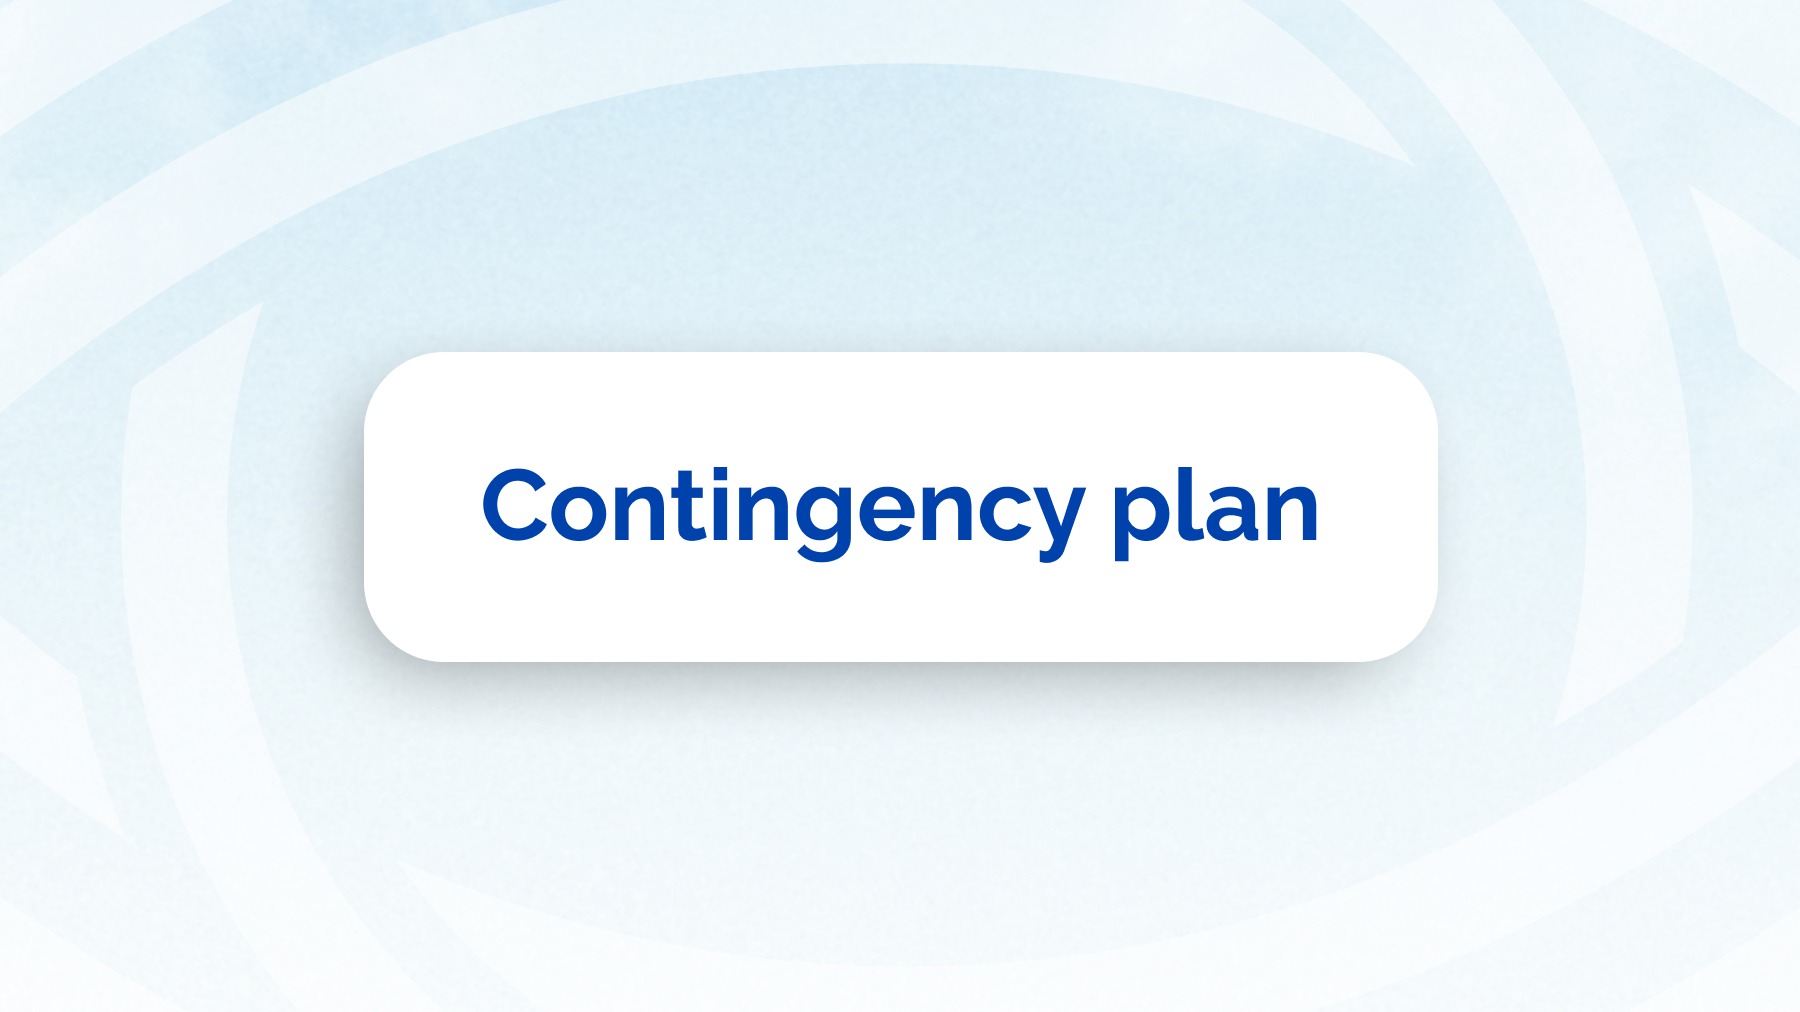 Contingency plan | PlanetWatch